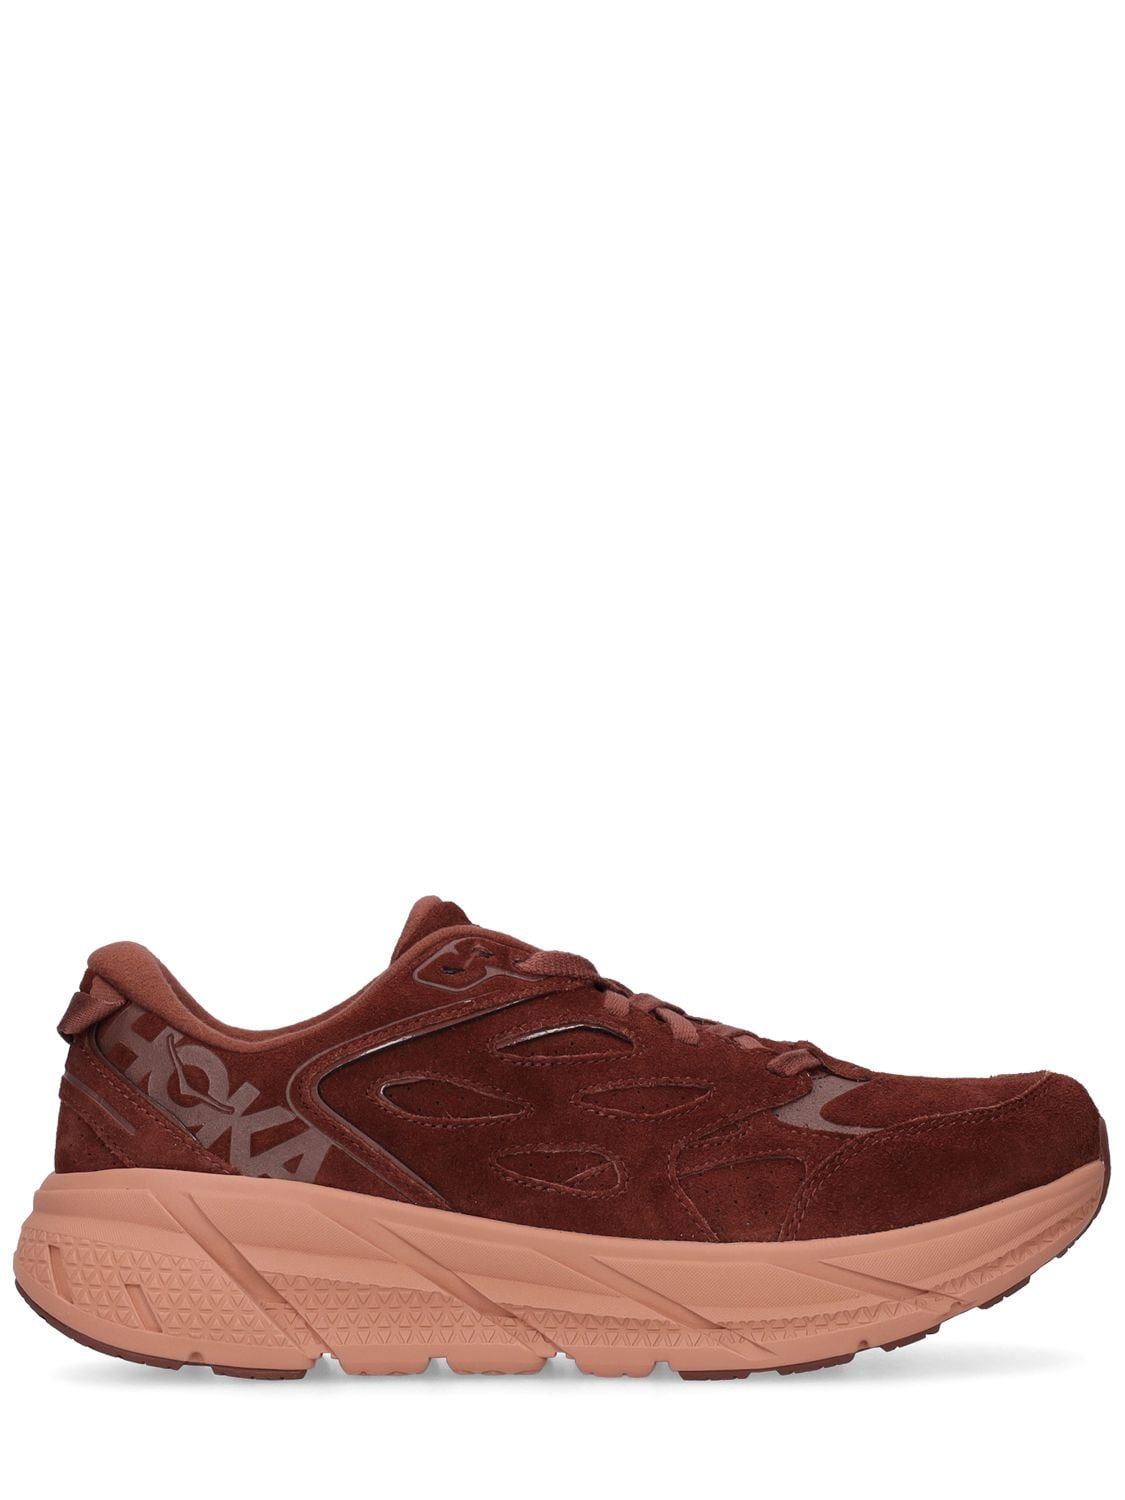 HOKA ONE ONE CLIFTON L SUEDE RUNNING SNEAKERS